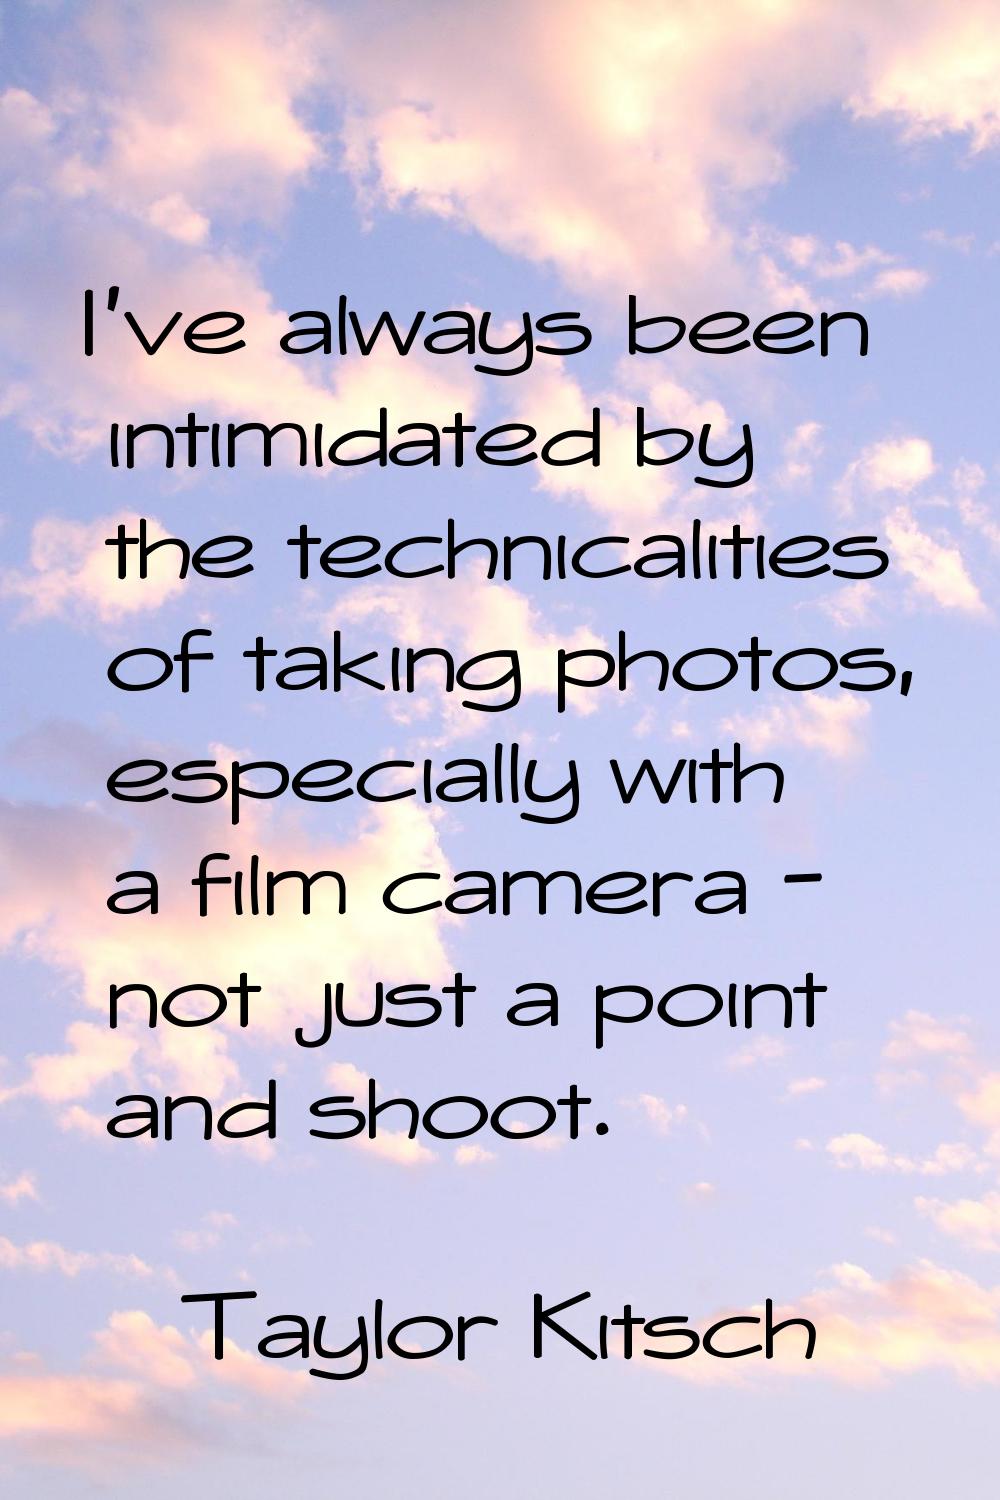 I've always been intimidated by the technicalities of taking photos, especially with a film camera 